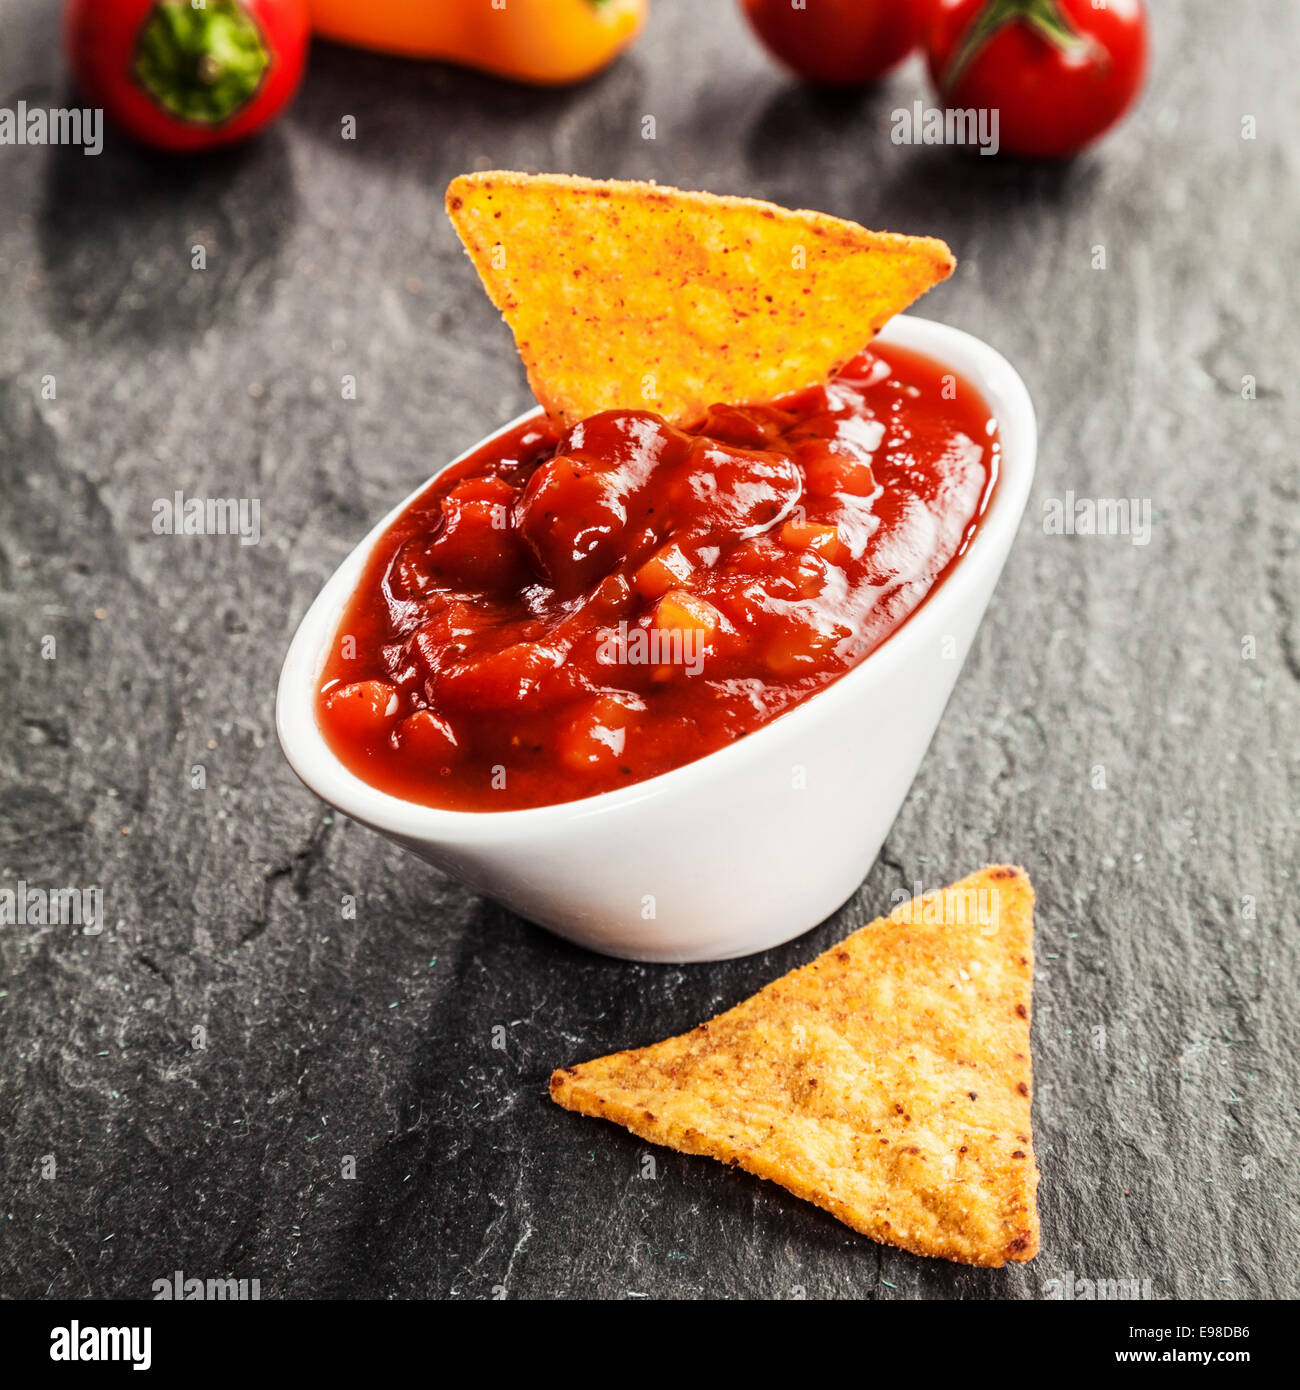 Bowl of delicious hot spicy tomato and chili salsa sauce served with triangular corn tortillas on a slate surface as a snack and appetizer Stock Photo